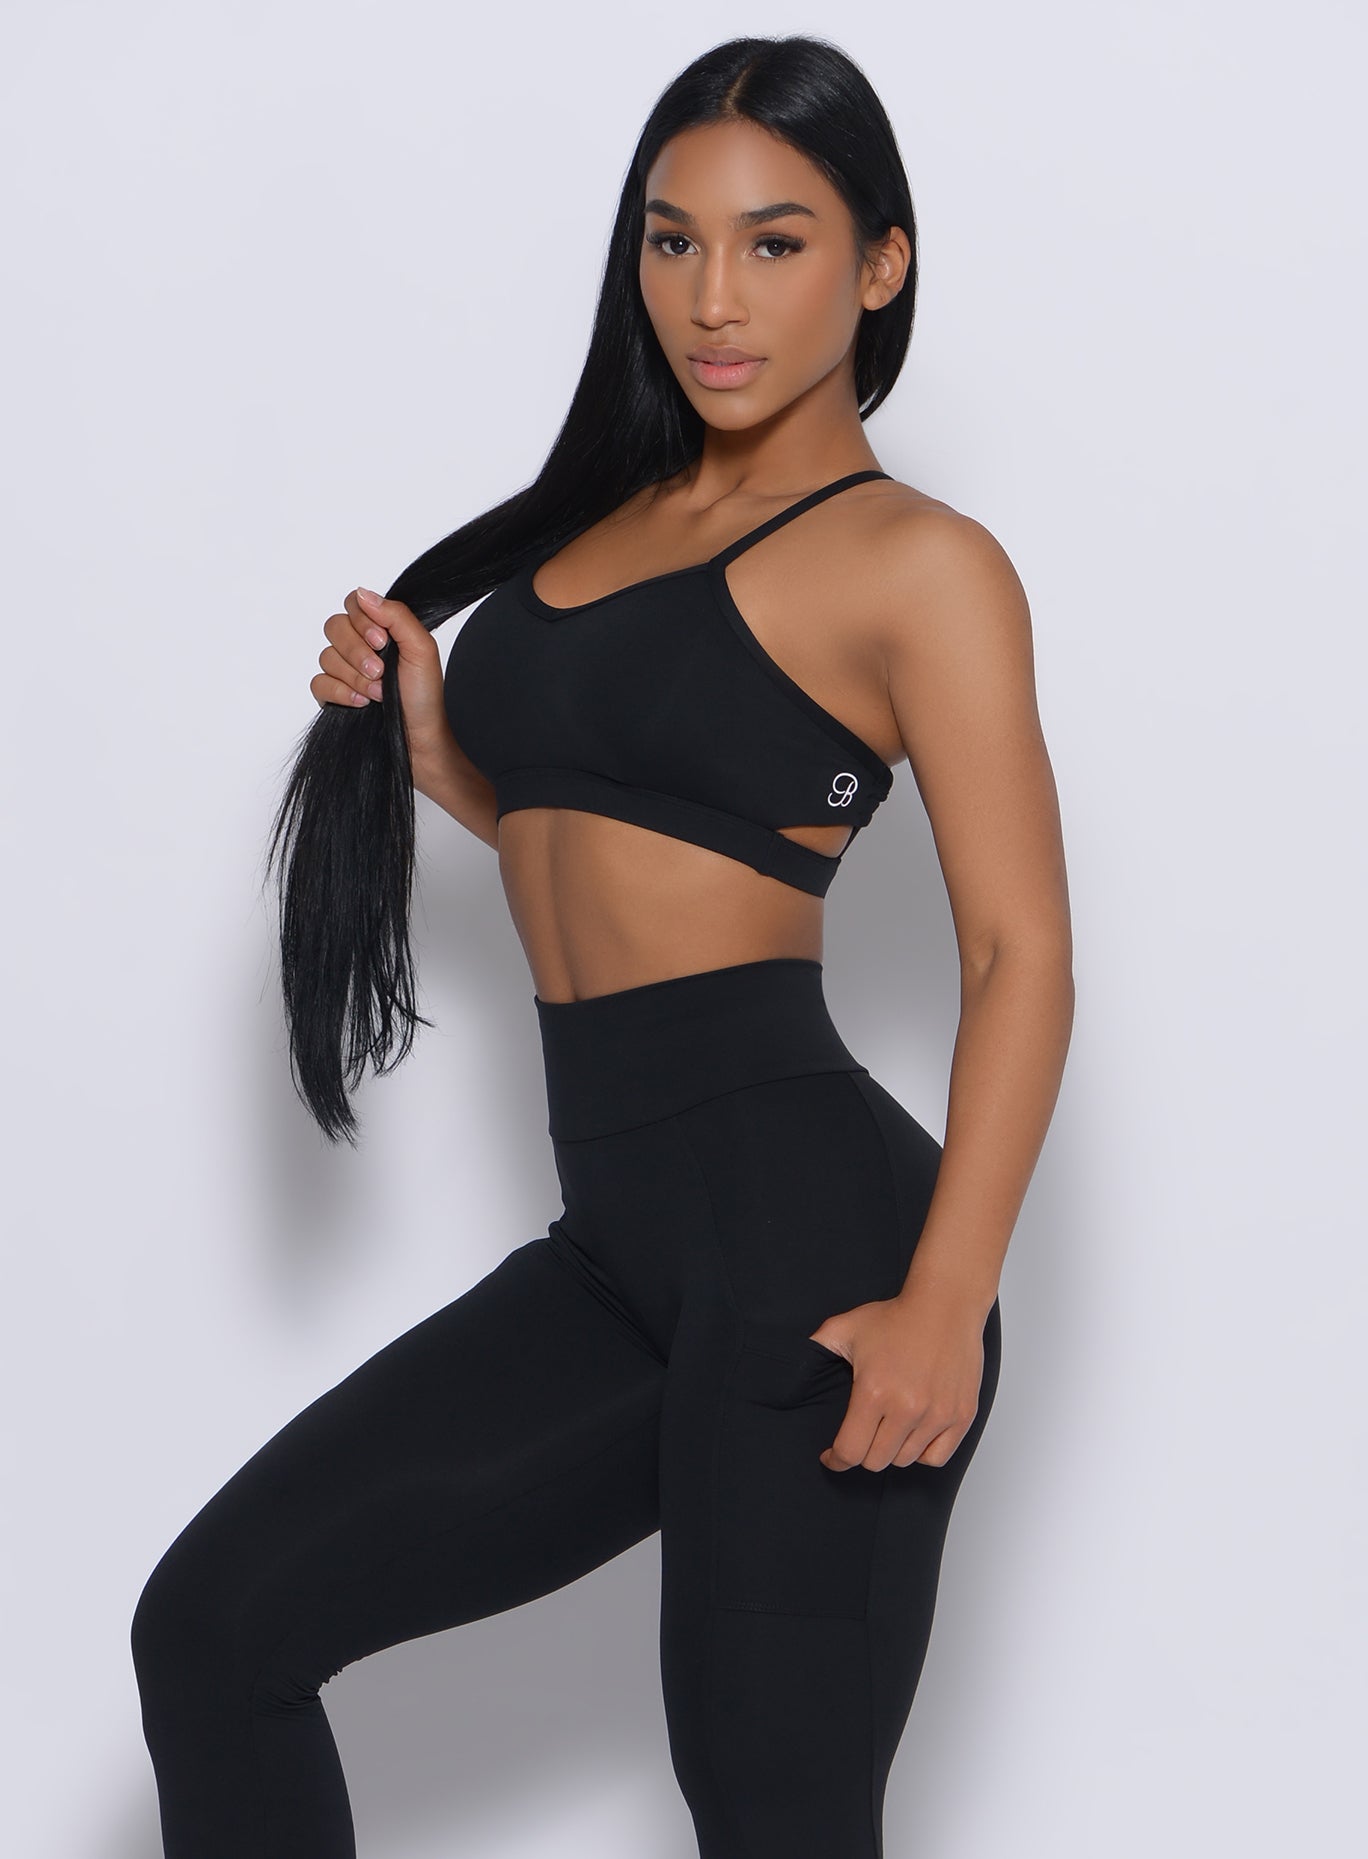 Left side profile view of a model holding her hair wearing our black pumped sports bra and a matching leggings